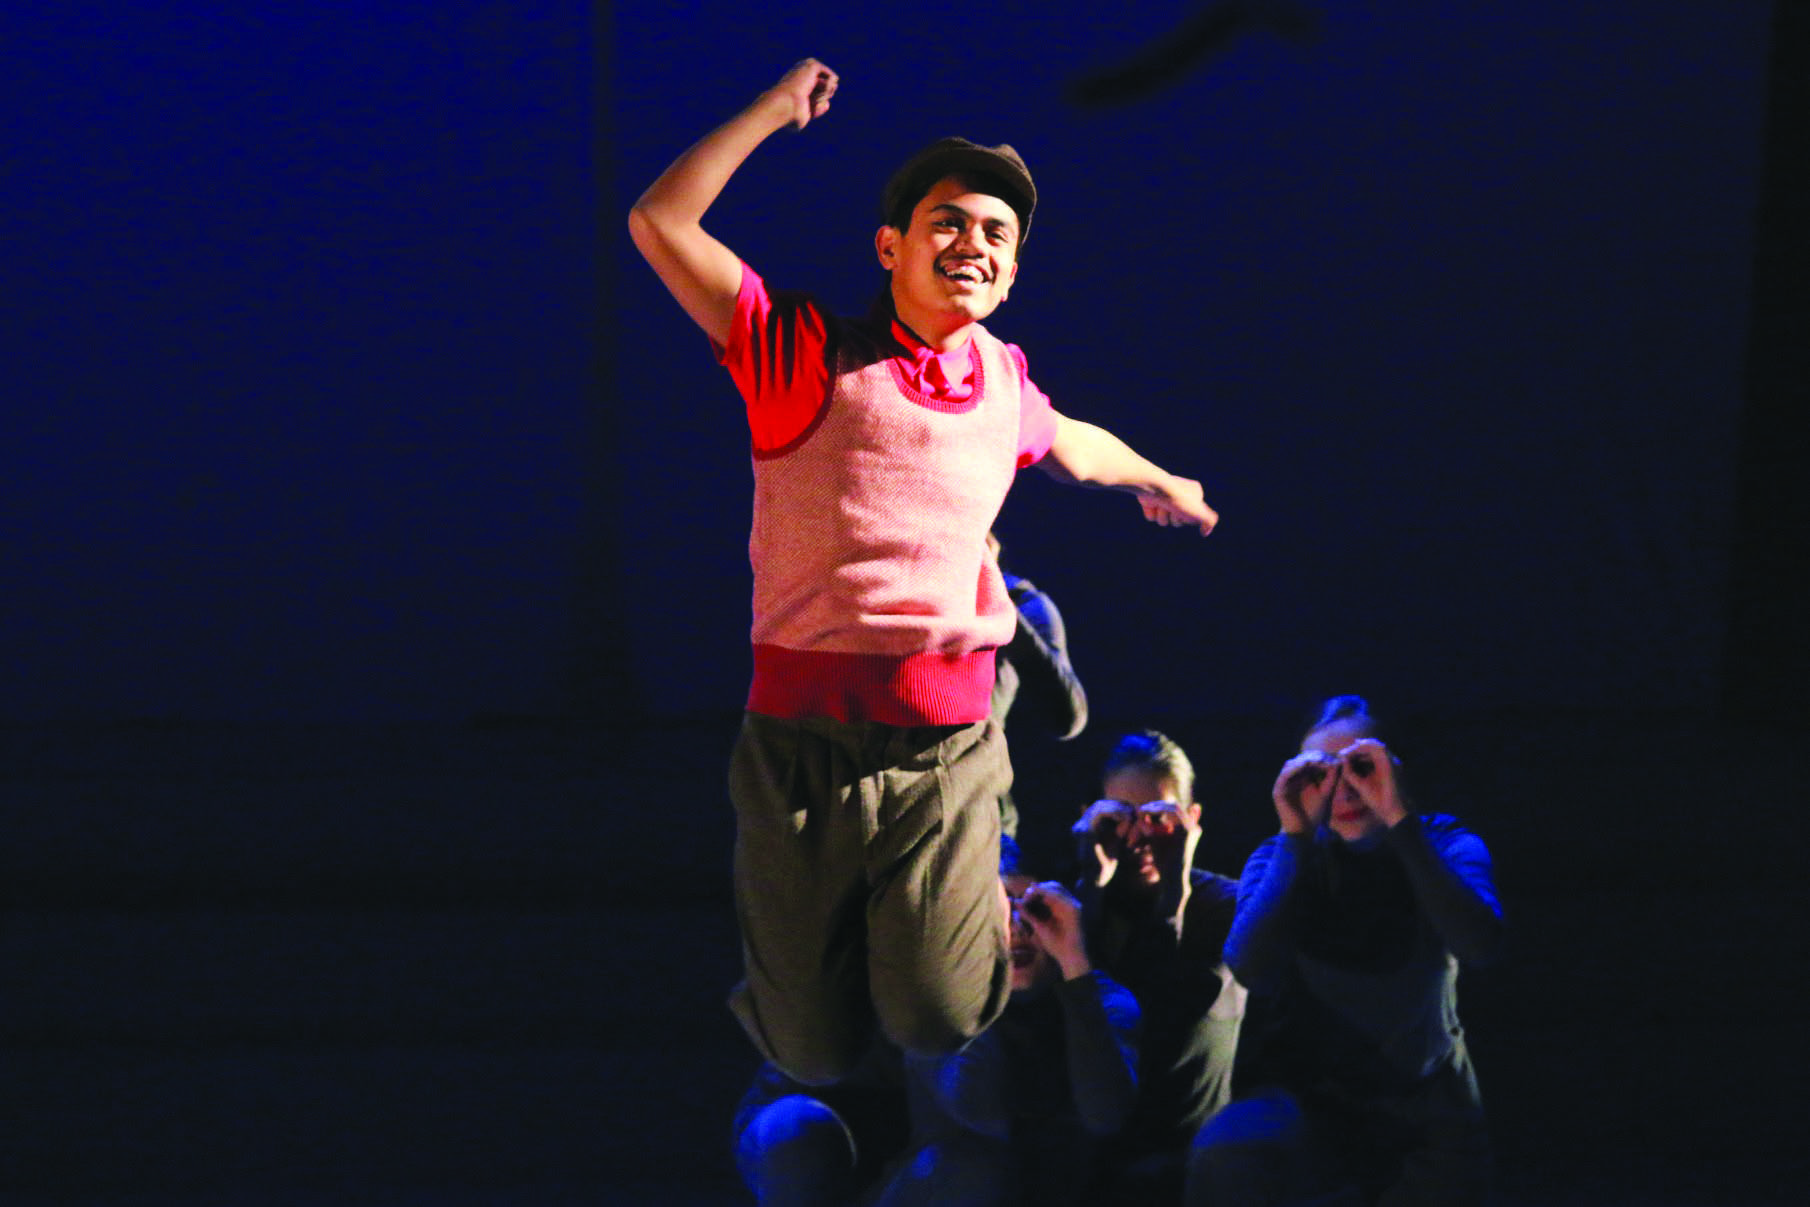 JUMP FOR JOY: Erick Gredonia ’17, who plays Charlie, celebrates after being given the key to Willy Wonka’s factory. Credit: Pavan Tauh/Chronicle